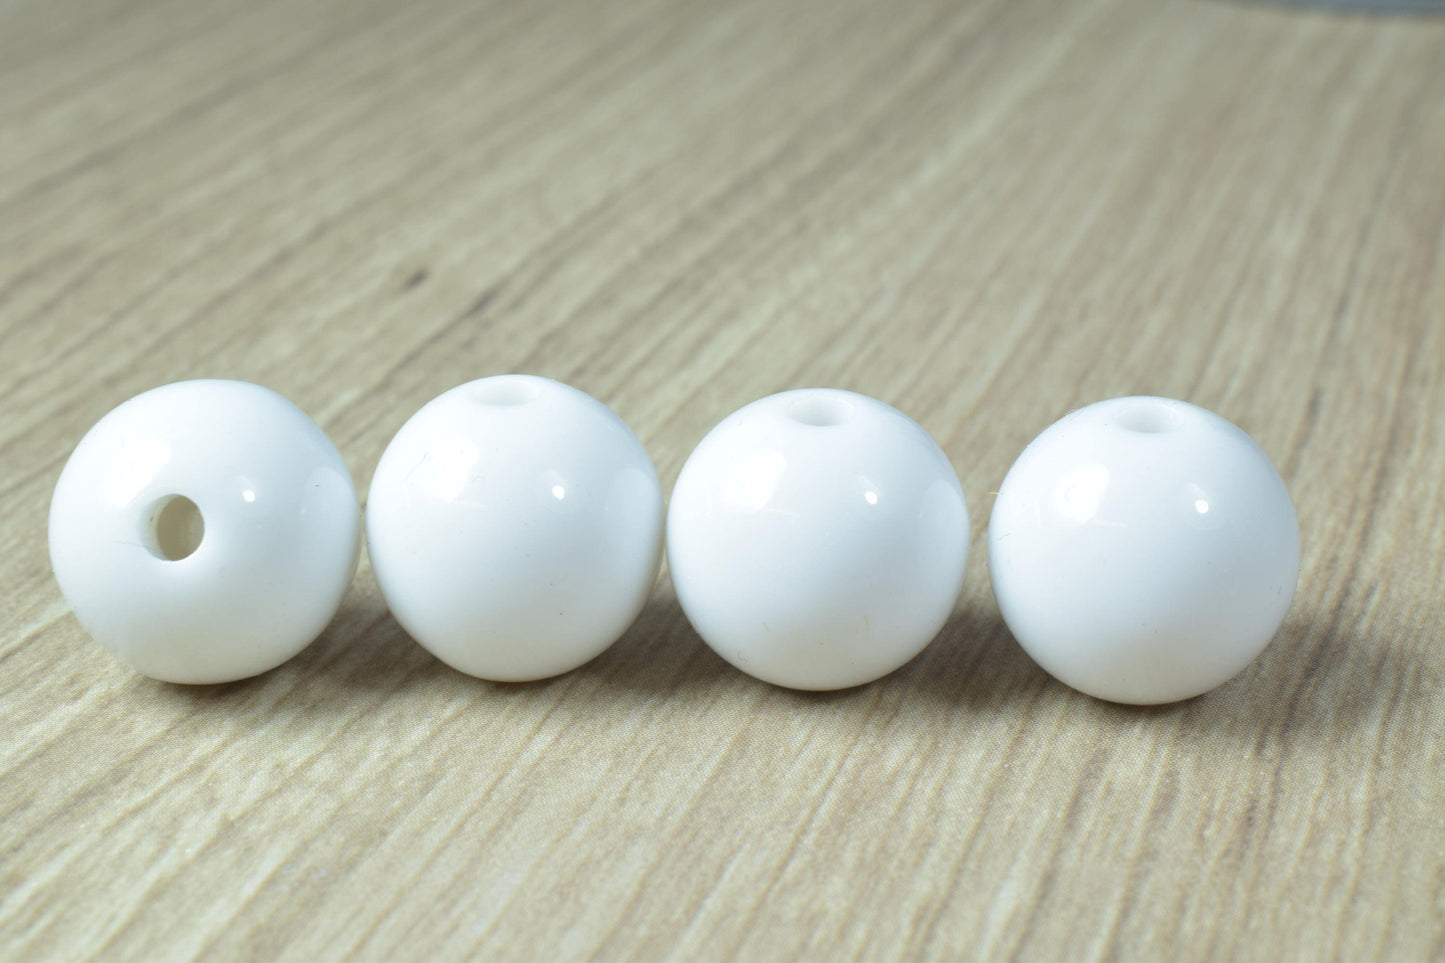 14mm White Smooth Plastic Gumball Beads, 14mm Large Smooth, Acrylic Round Ball Beads,White,Large Chunky Acrylic Beads, Smooth Bead